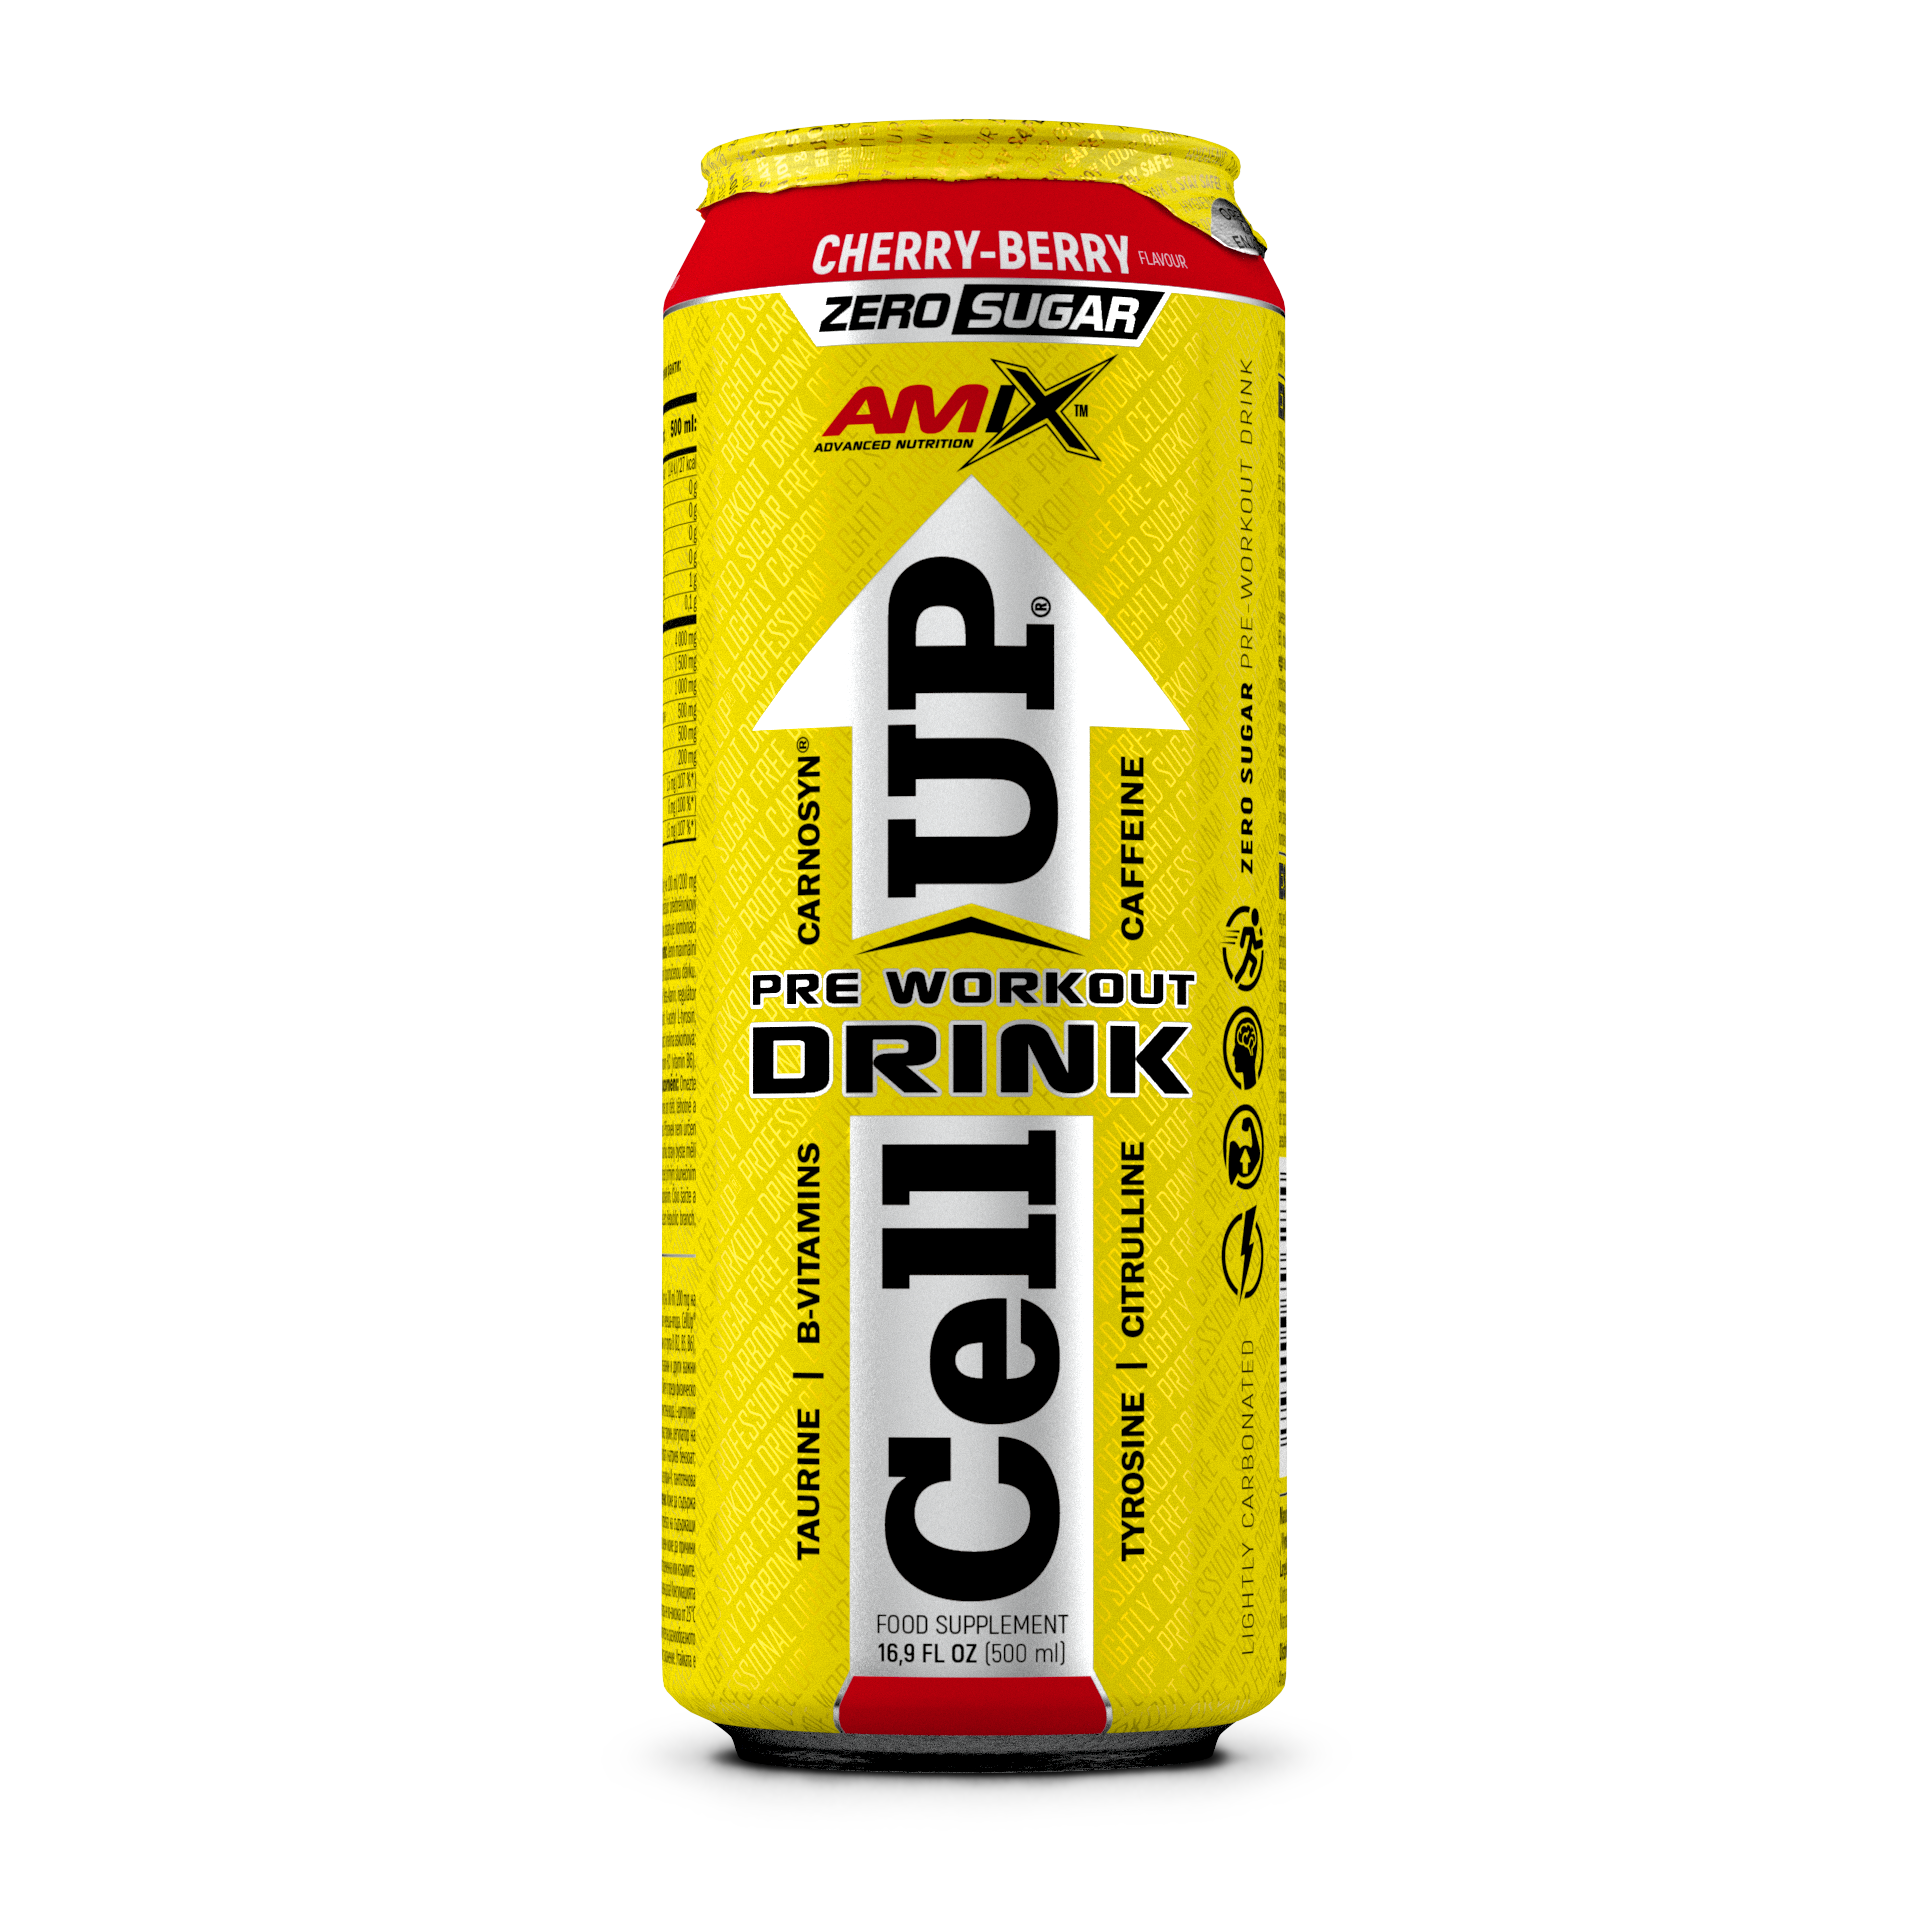 CELLUP PRE-WORKOUT DRINK 500ml